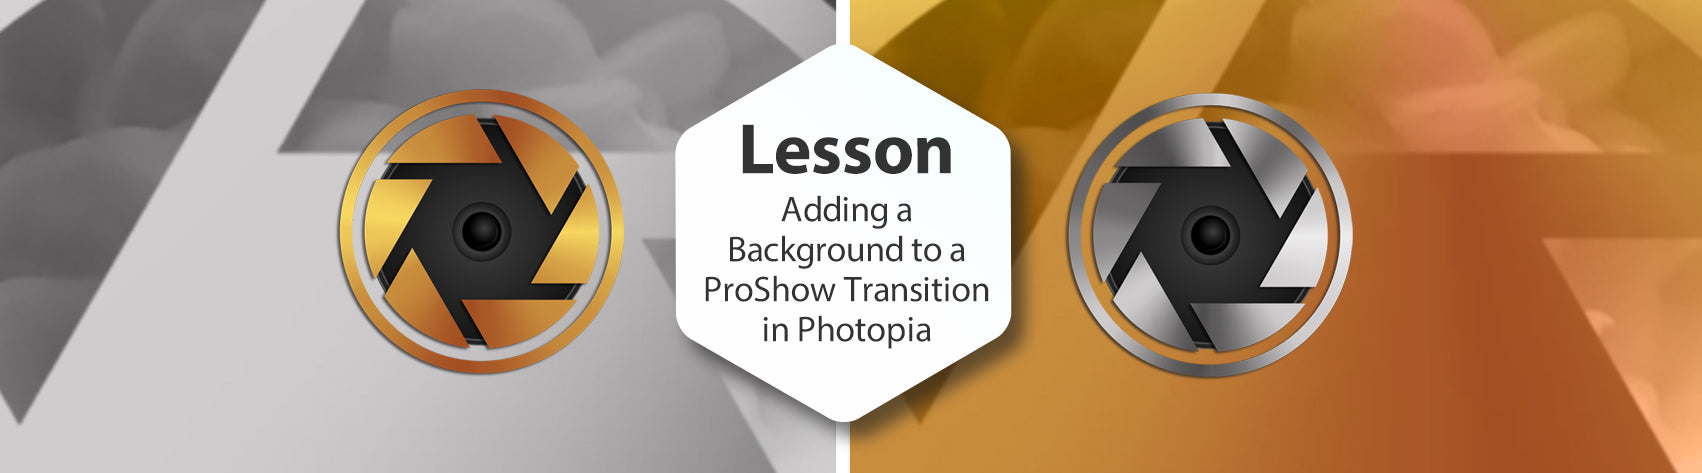 Adding a Background to ProShow Transitions in Photopia